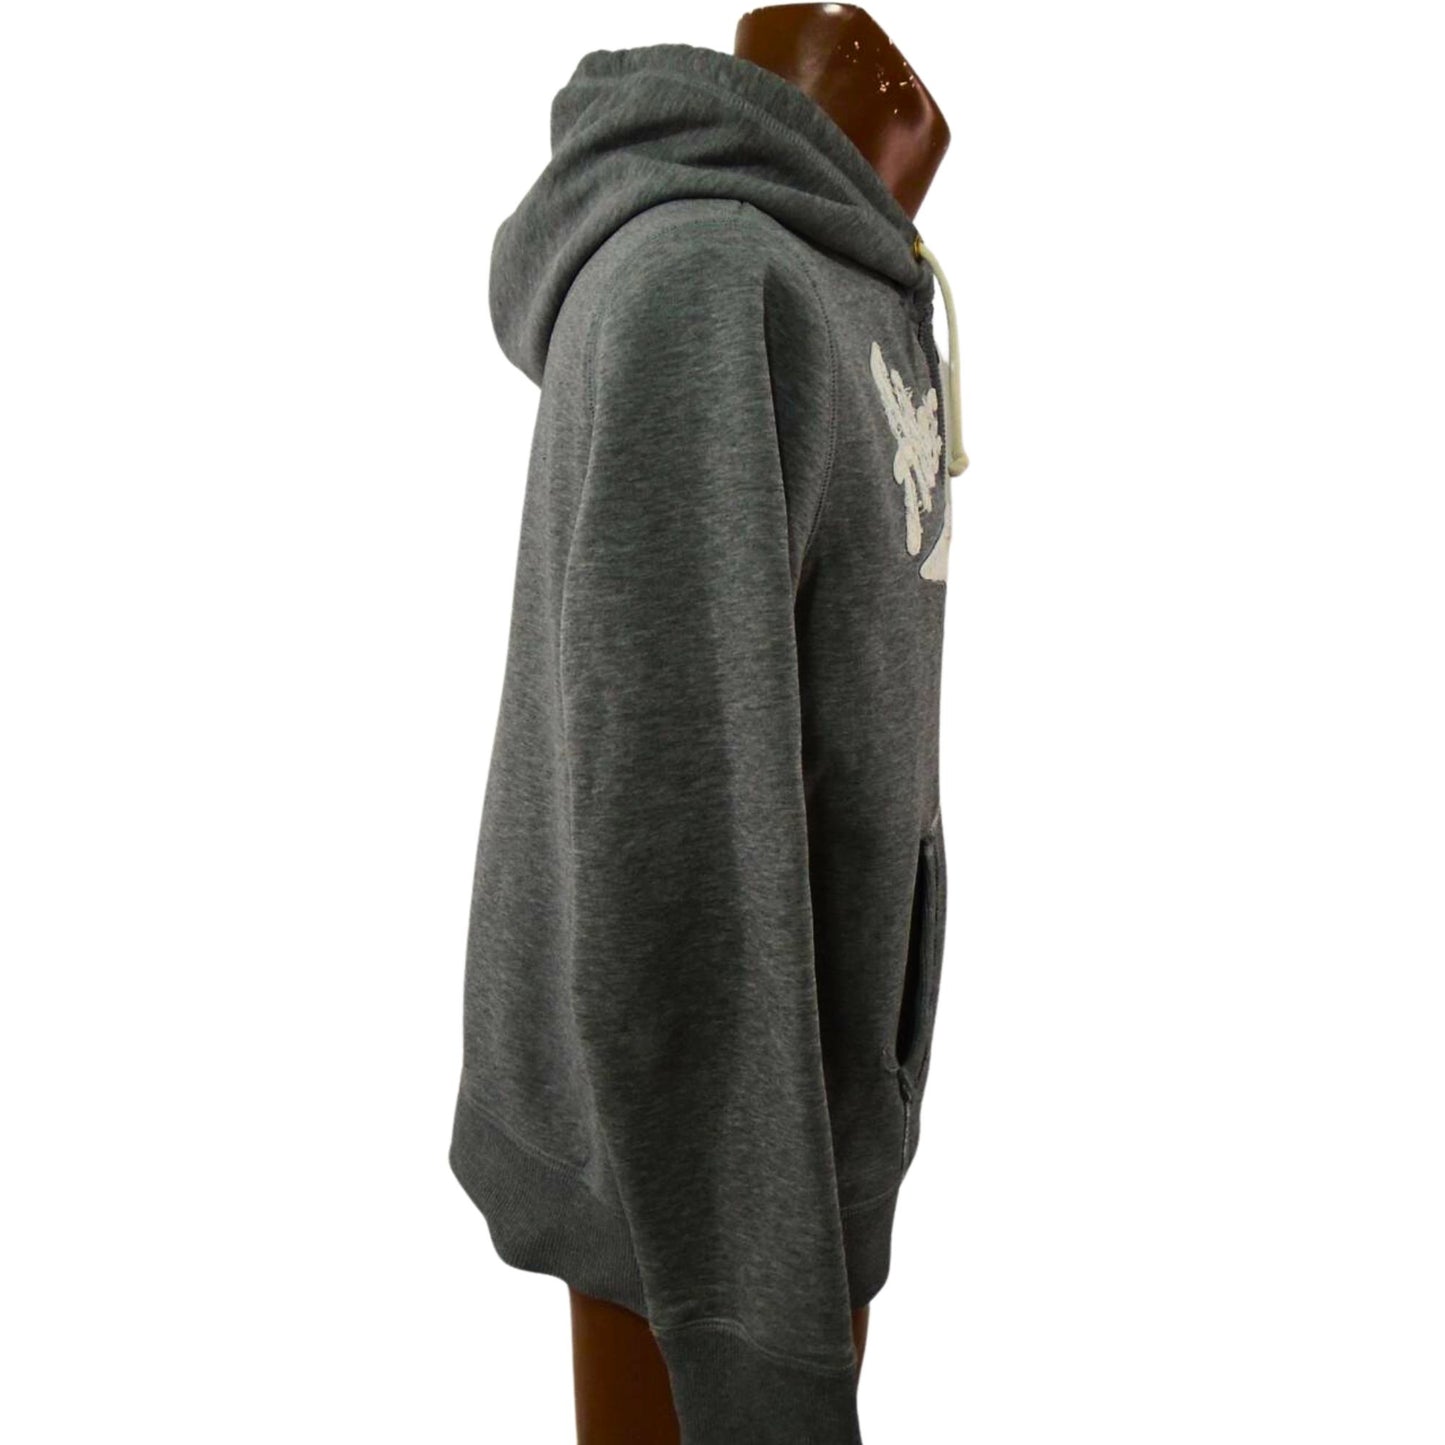 Stylish Men's Abercrombie & Fitch Hoodie in Grey, Size M - Used, Good Condition